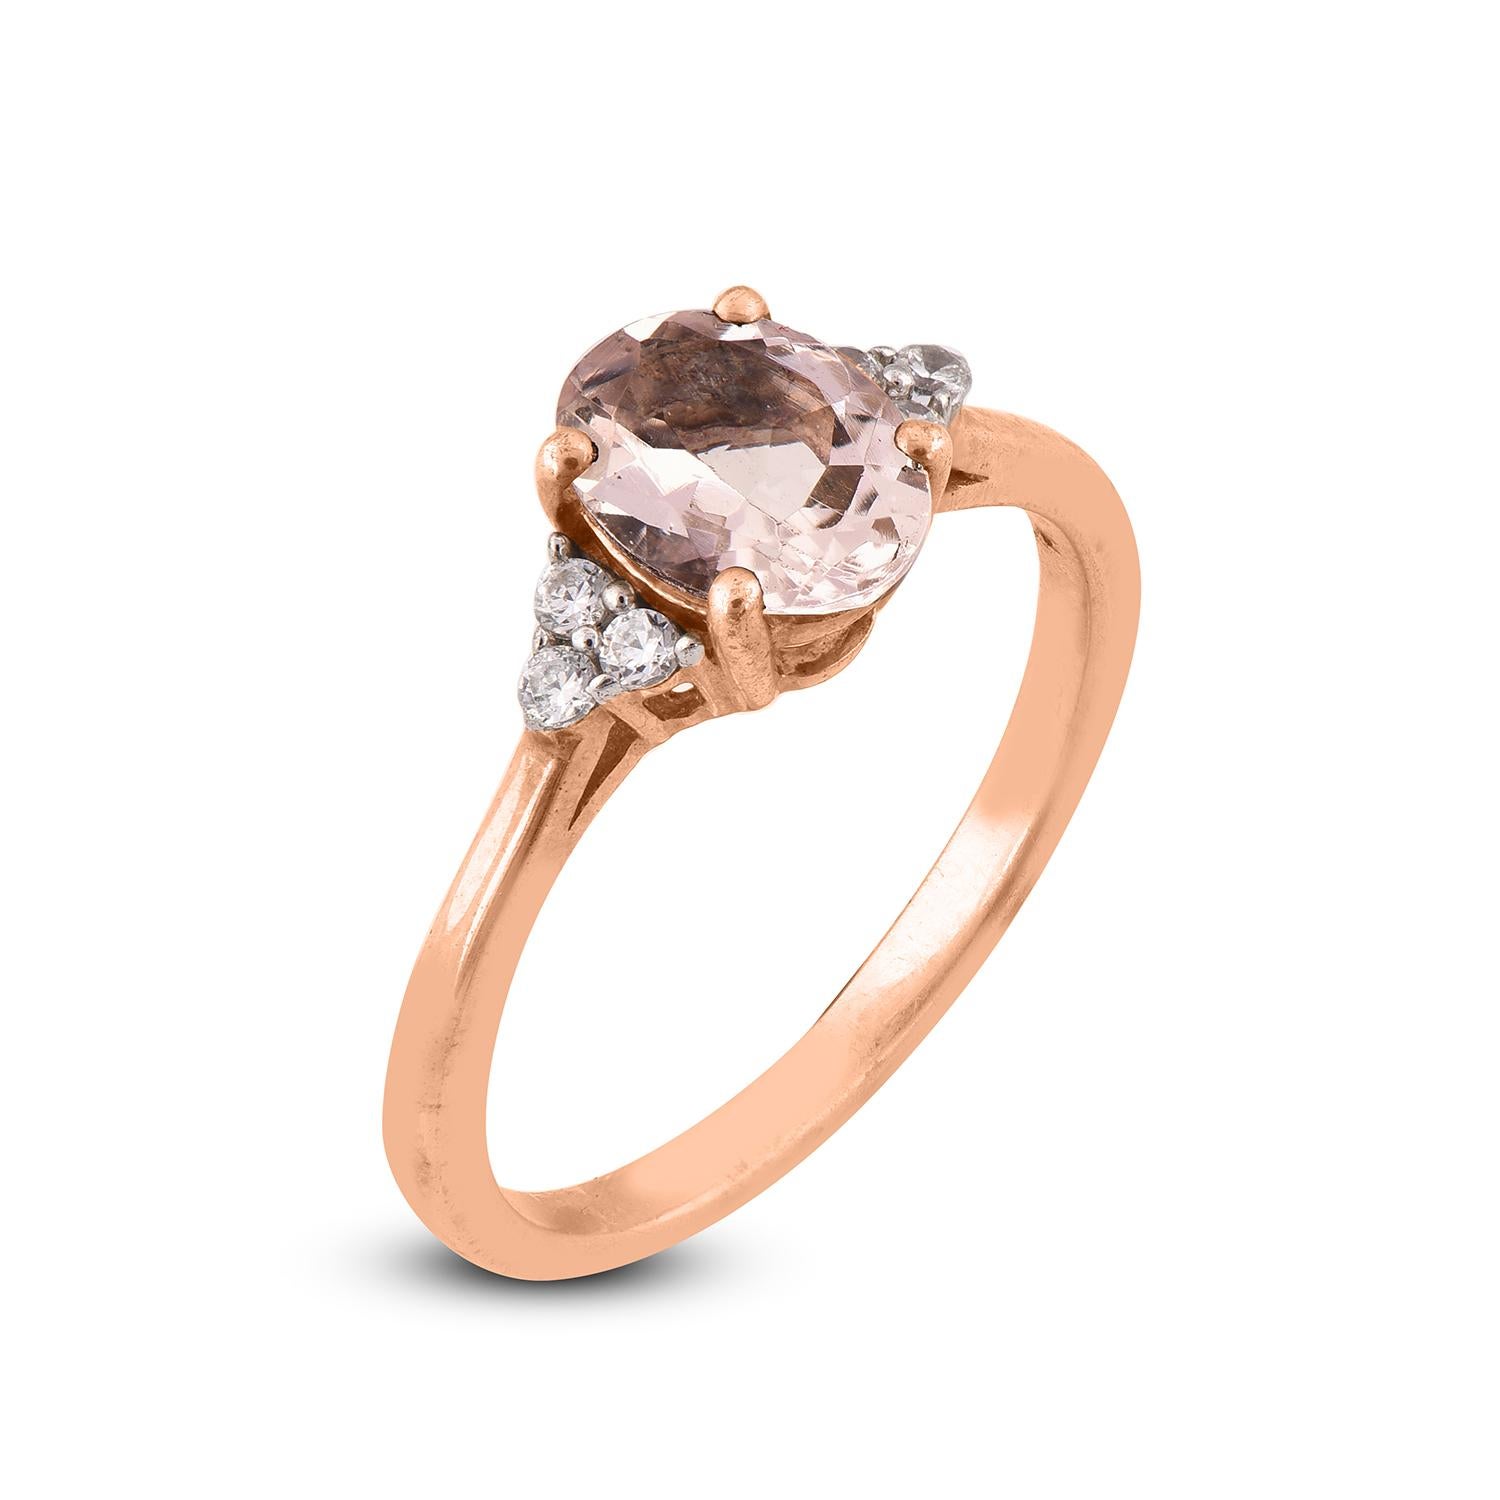 This stunning ring is made by our experts in 14 karat rose gold and accentuated with 6 round cut and 1 Oval shape Morganite set in prong setting. The diamonds are graded H-I Color, I2 Clarity.
